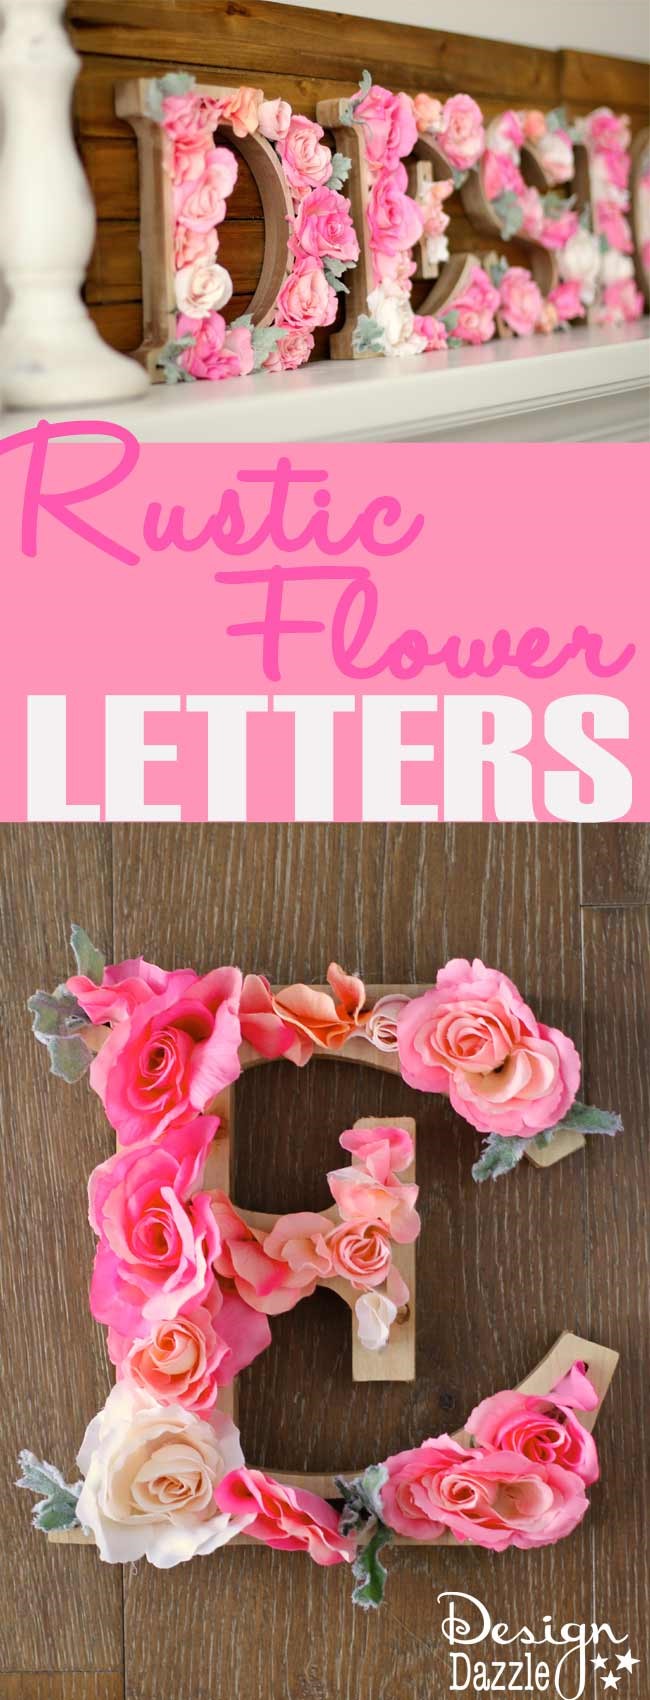 7 Letters with Flowers Simphome com